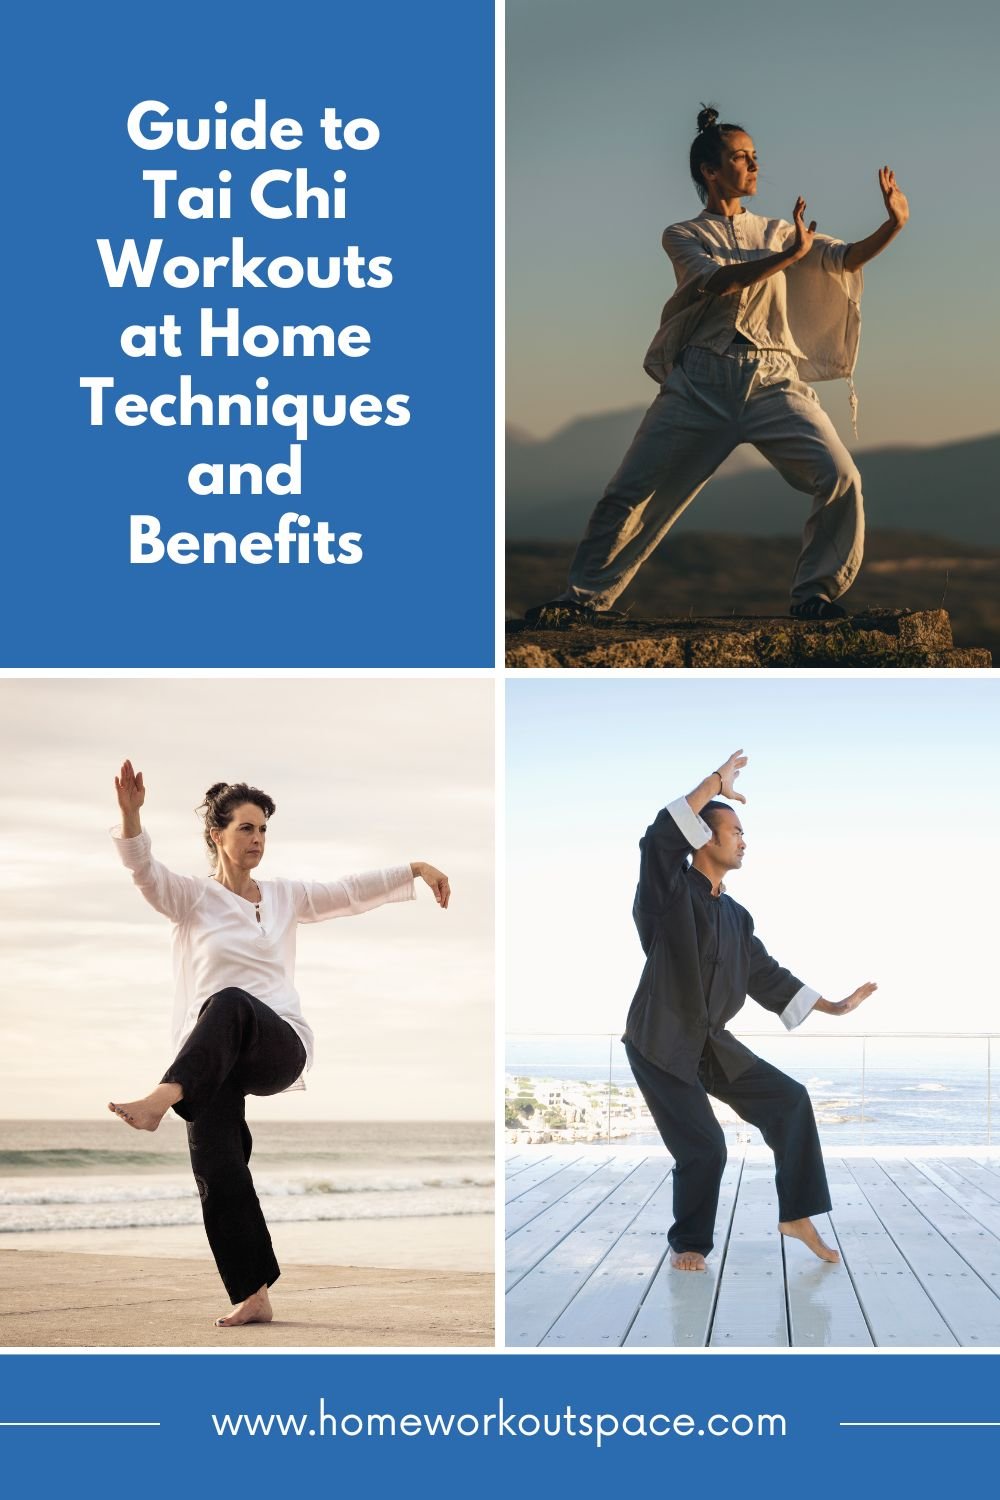 Guide to Tai Chi Workouts at Home Techniques and Benefits